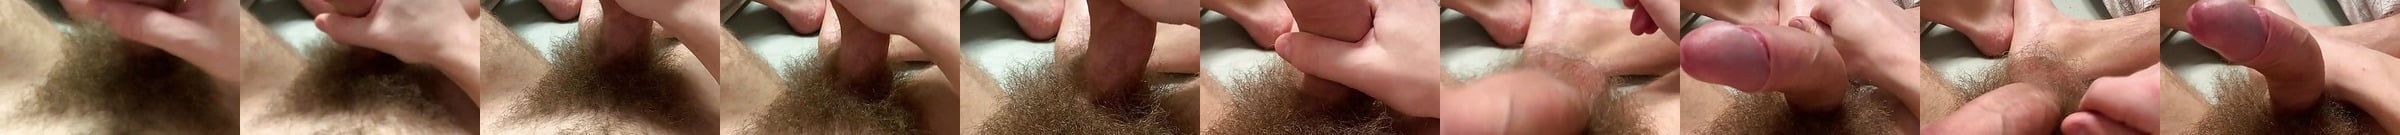 Soft Uncut Cock Free Gay Porn Video Bb Xhamster